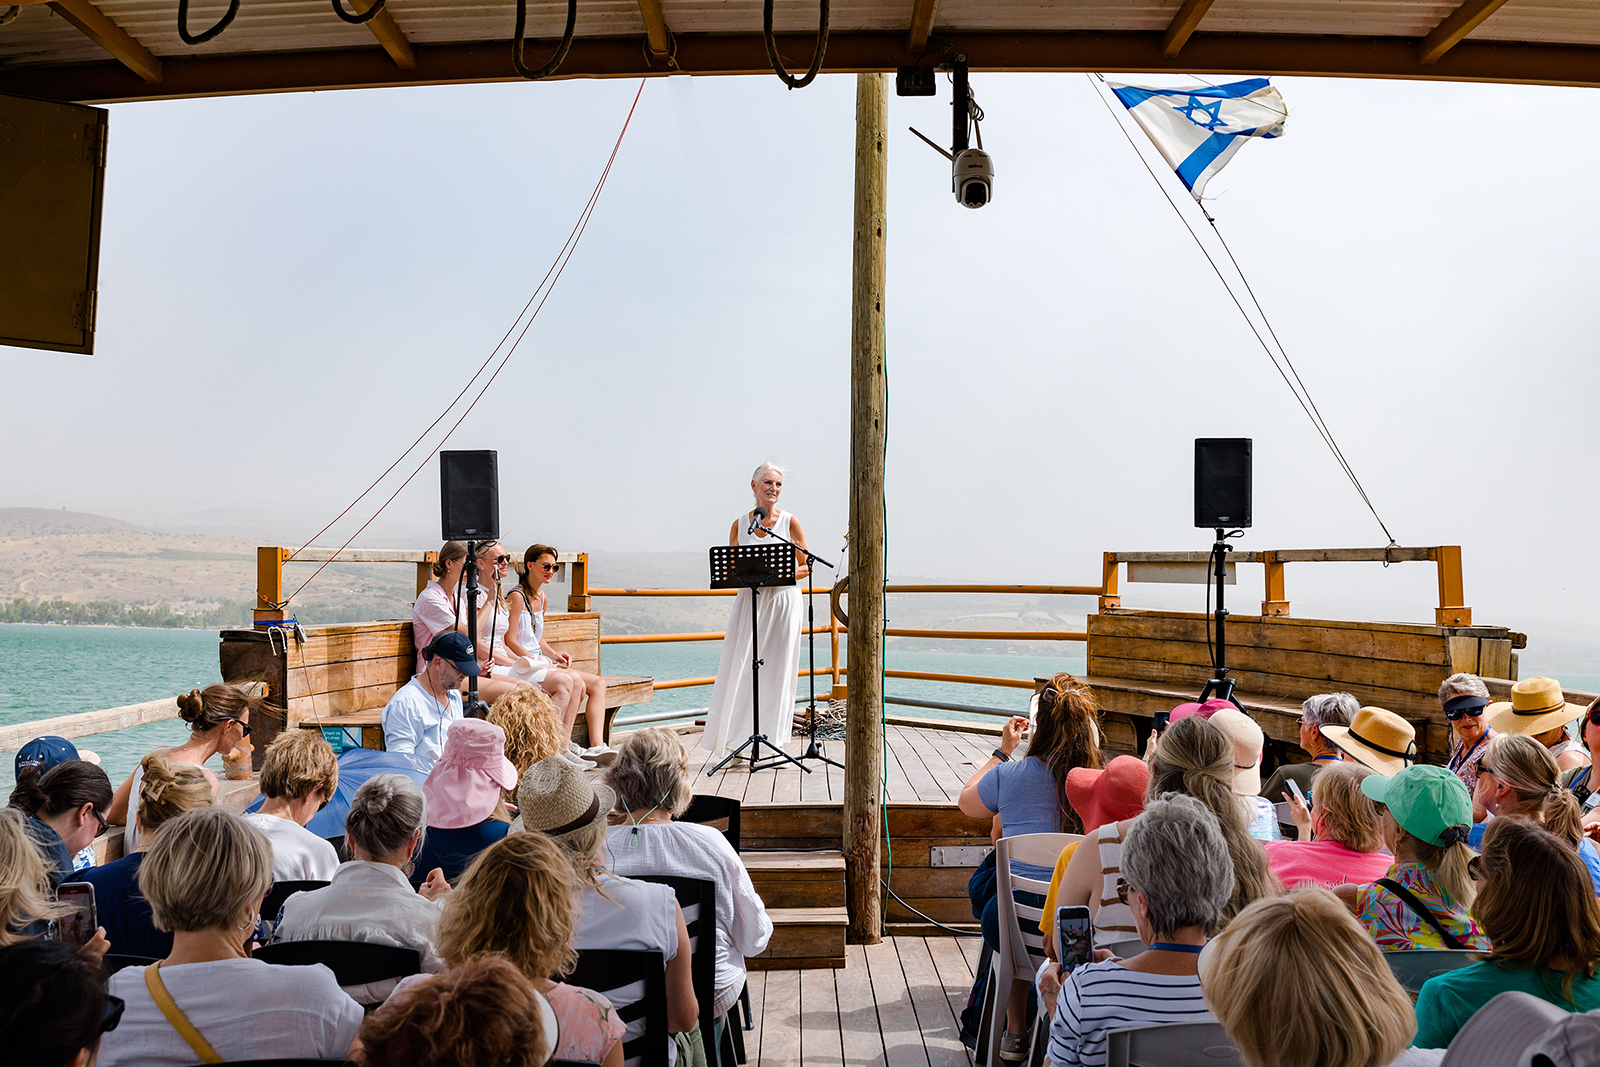 Anne Graham Lotz speaks aboard a boat on the Sea of Galilee during an AnGel Ministries tour of Israel. Photo by Beth Rubin